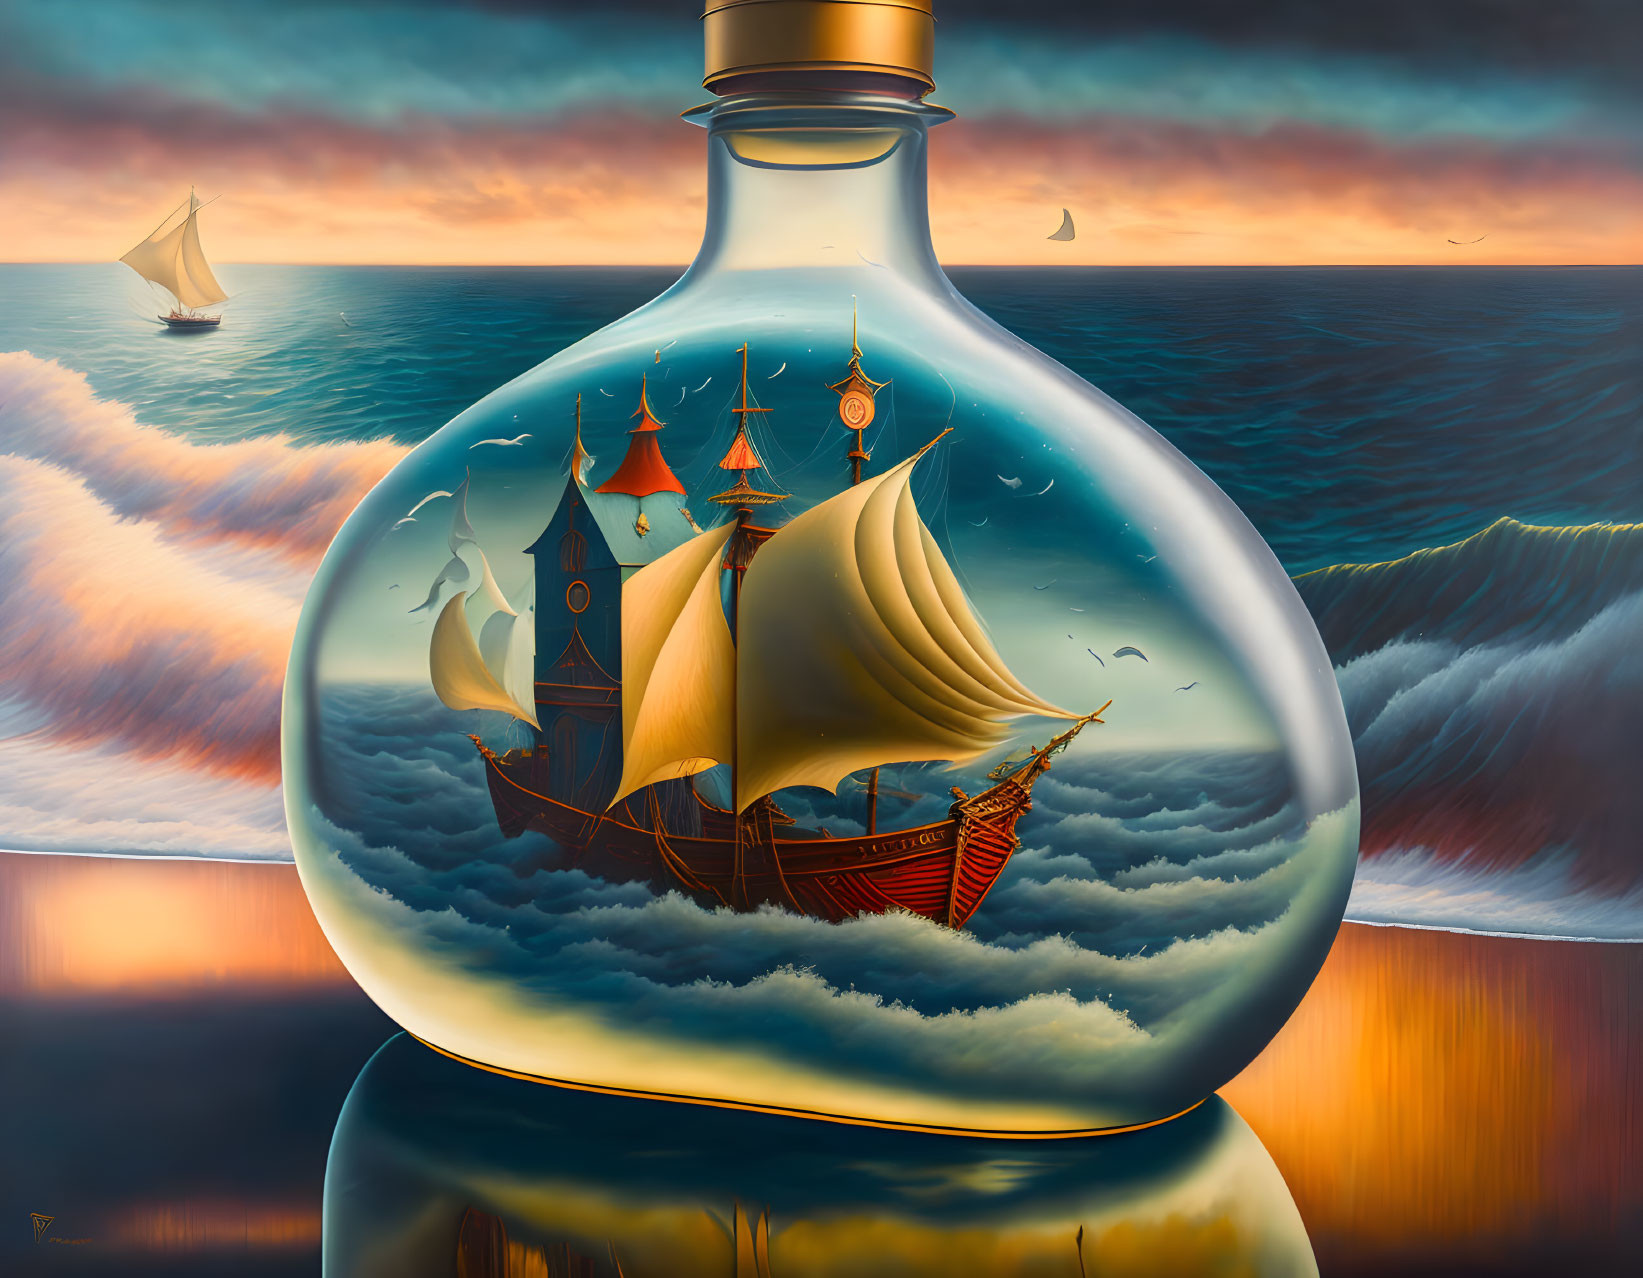 Surreal painting: ship in glass bottle on sea at sunset